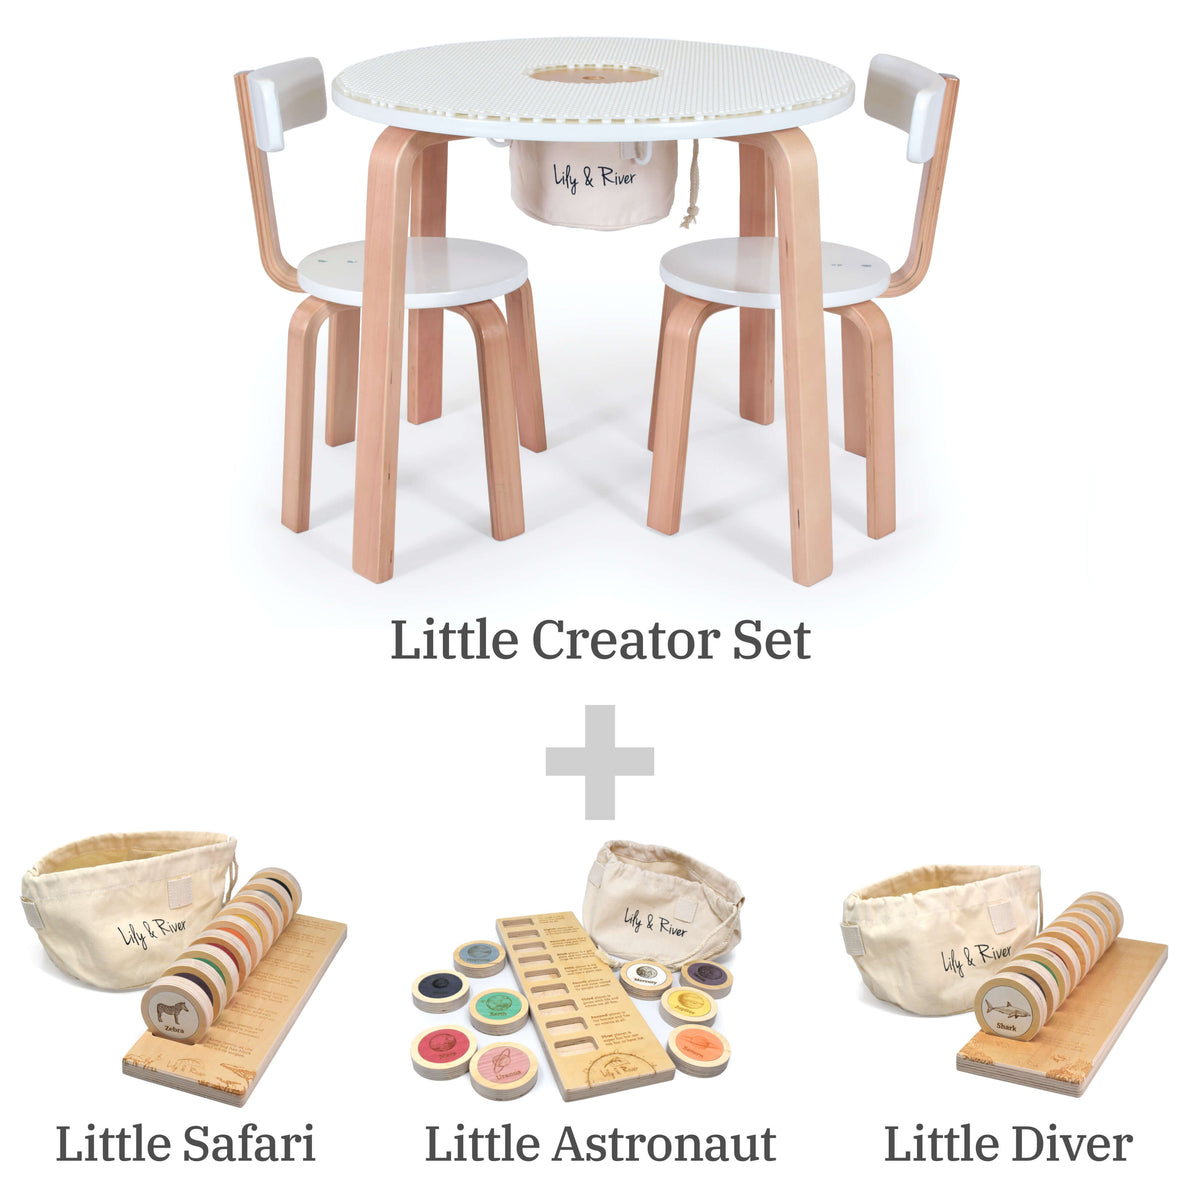 Lily And River Little World Diver Learning Game for Toddler